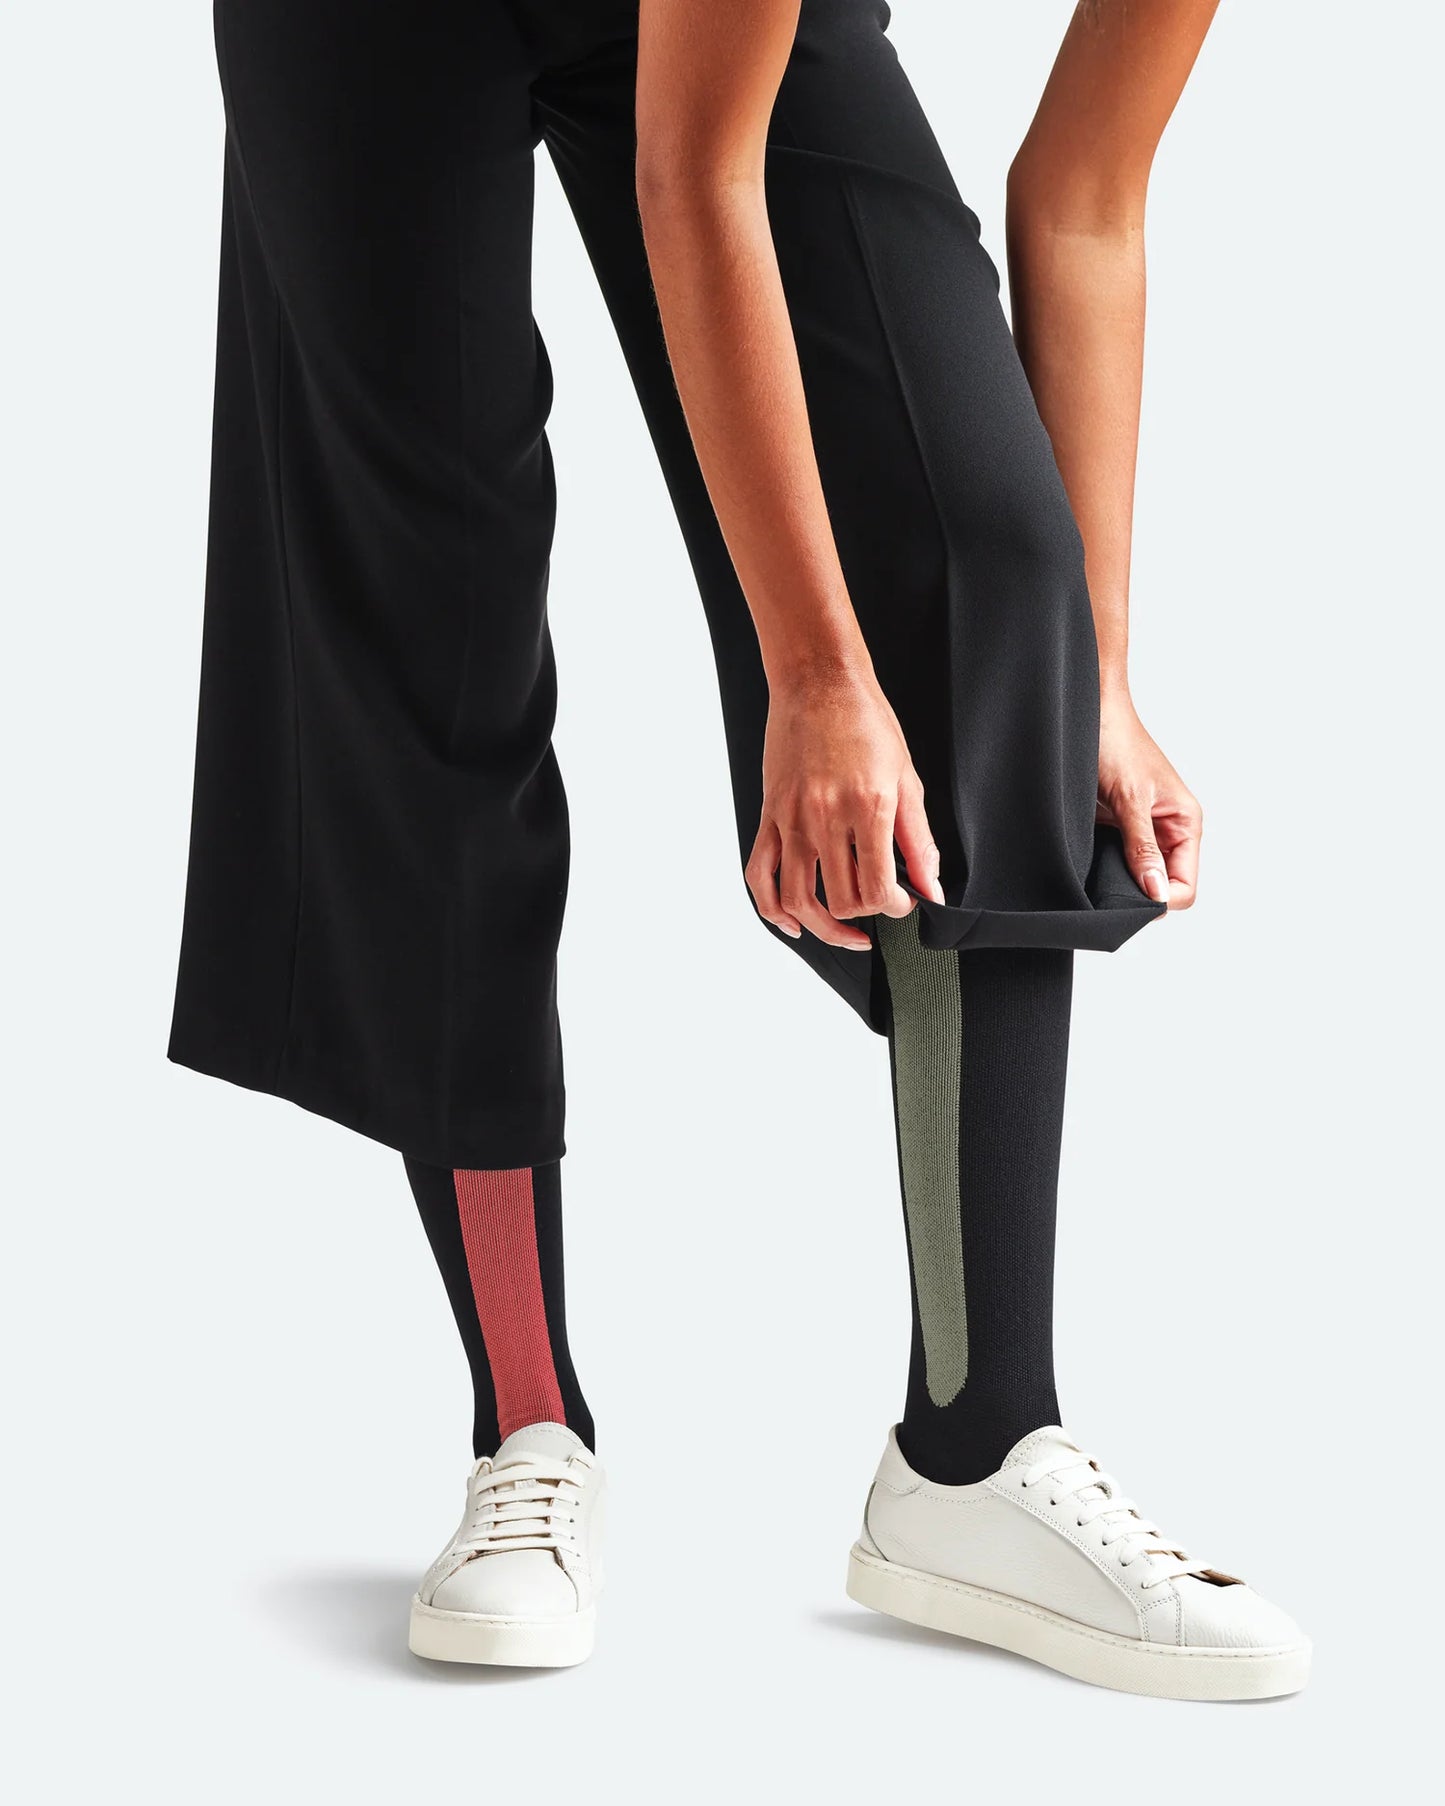 Bamboo Compression Socks . Sunset Red + Olive Green